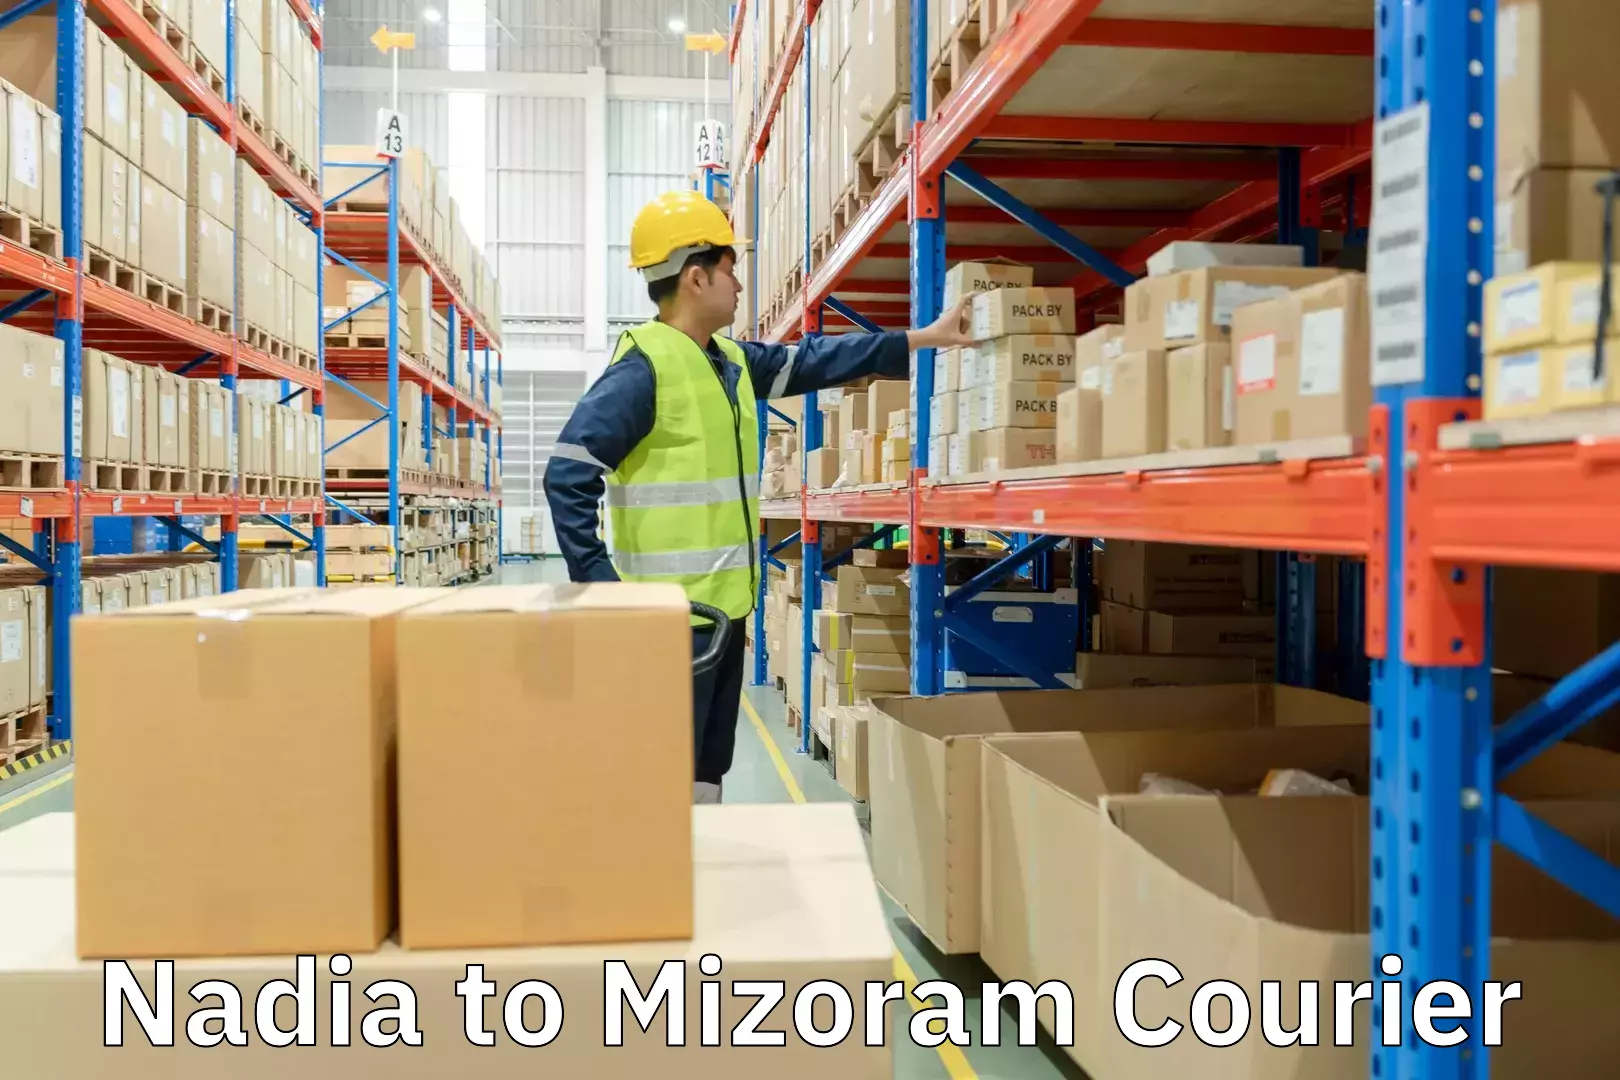 Full-service courier options Nadia to Mizoram